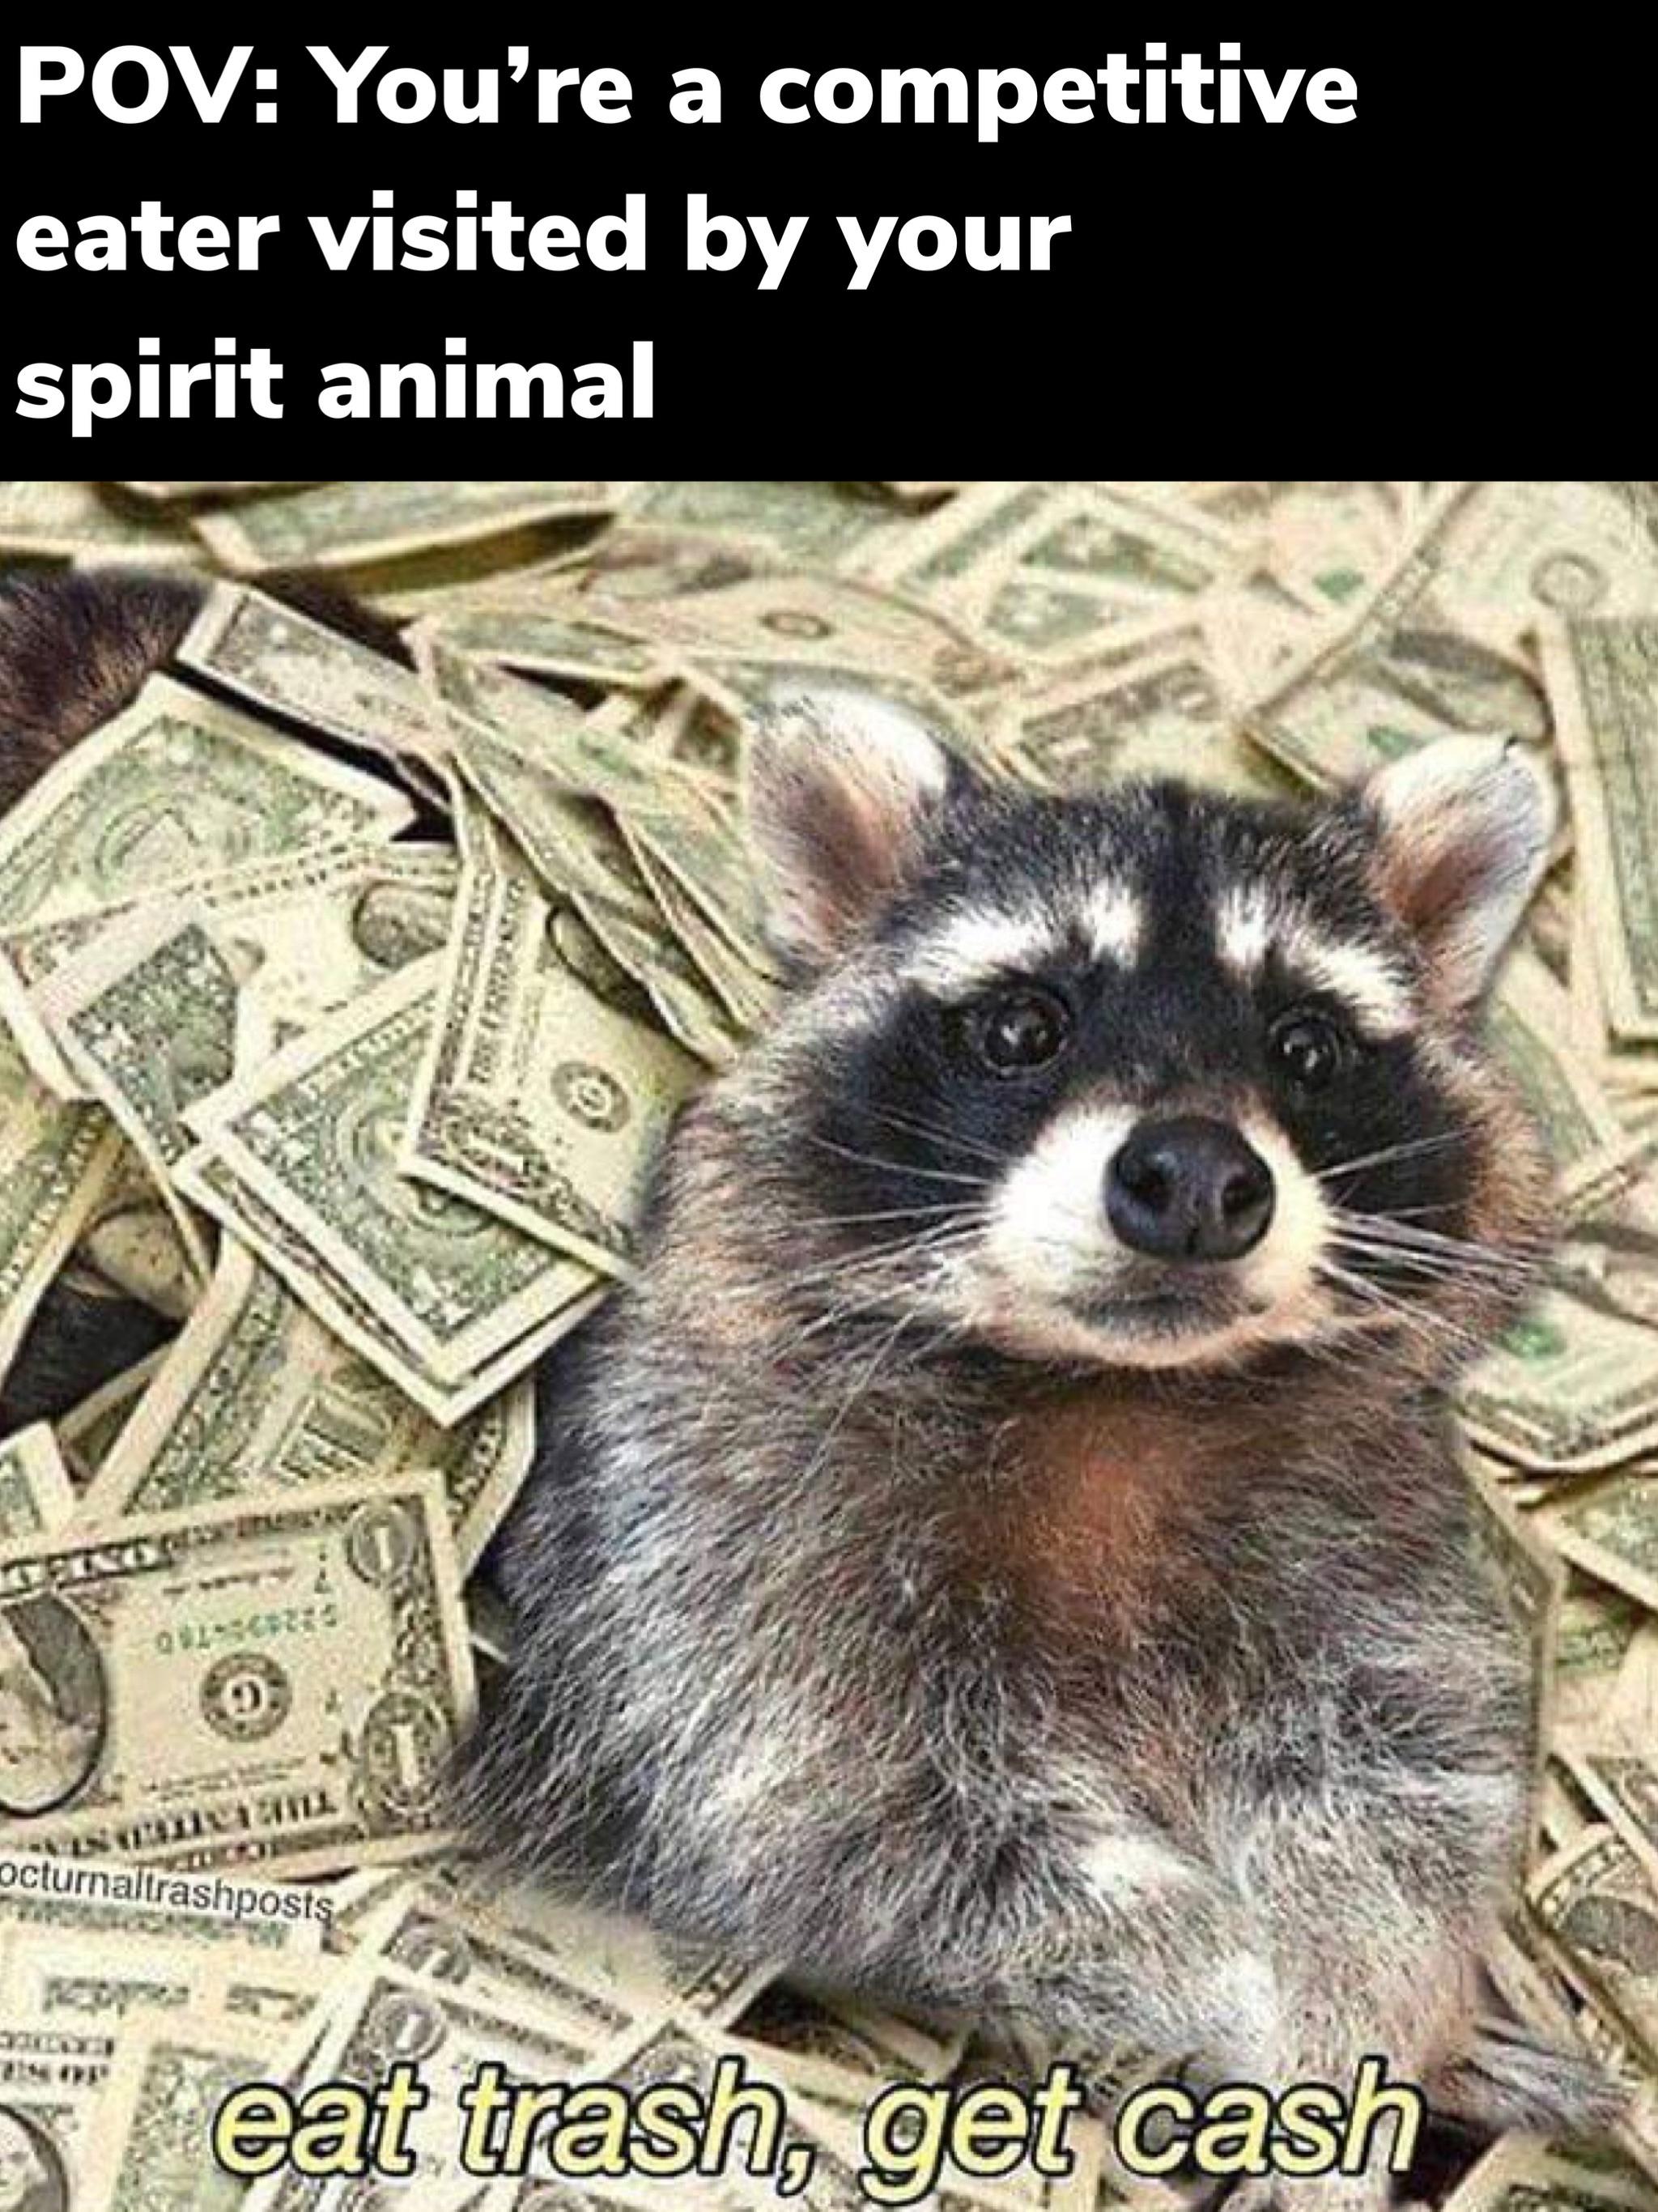 dank memes - dollar bill - Pov You're a competitive eater visited by your spirit animal Ts Te 0 acturnahrashposts No eat trash, get cash